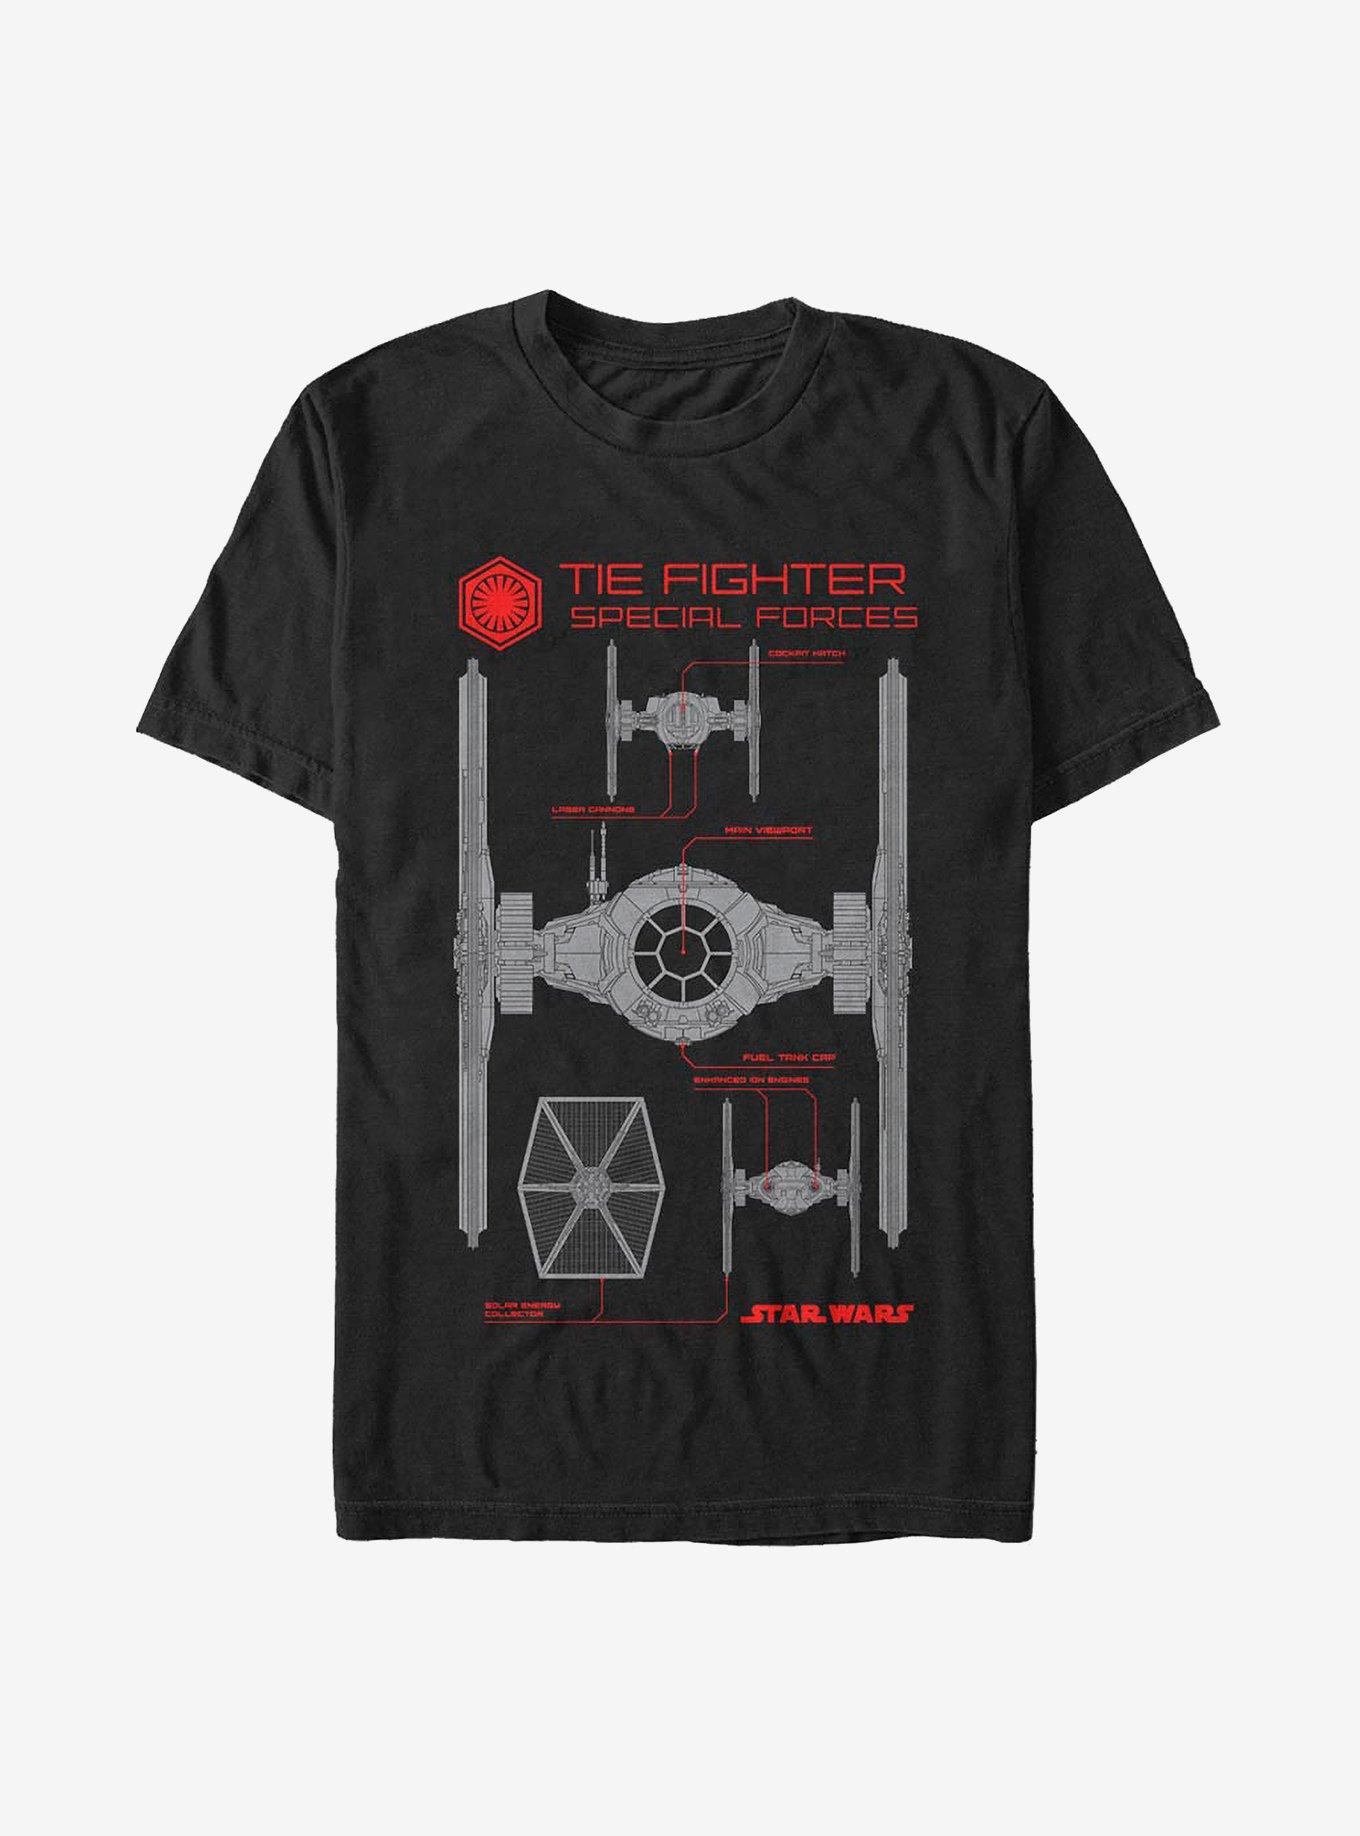 Star Wars: The Force Awakens Tie Fighter Special Forces T-Shirt, BLACK, hi-res